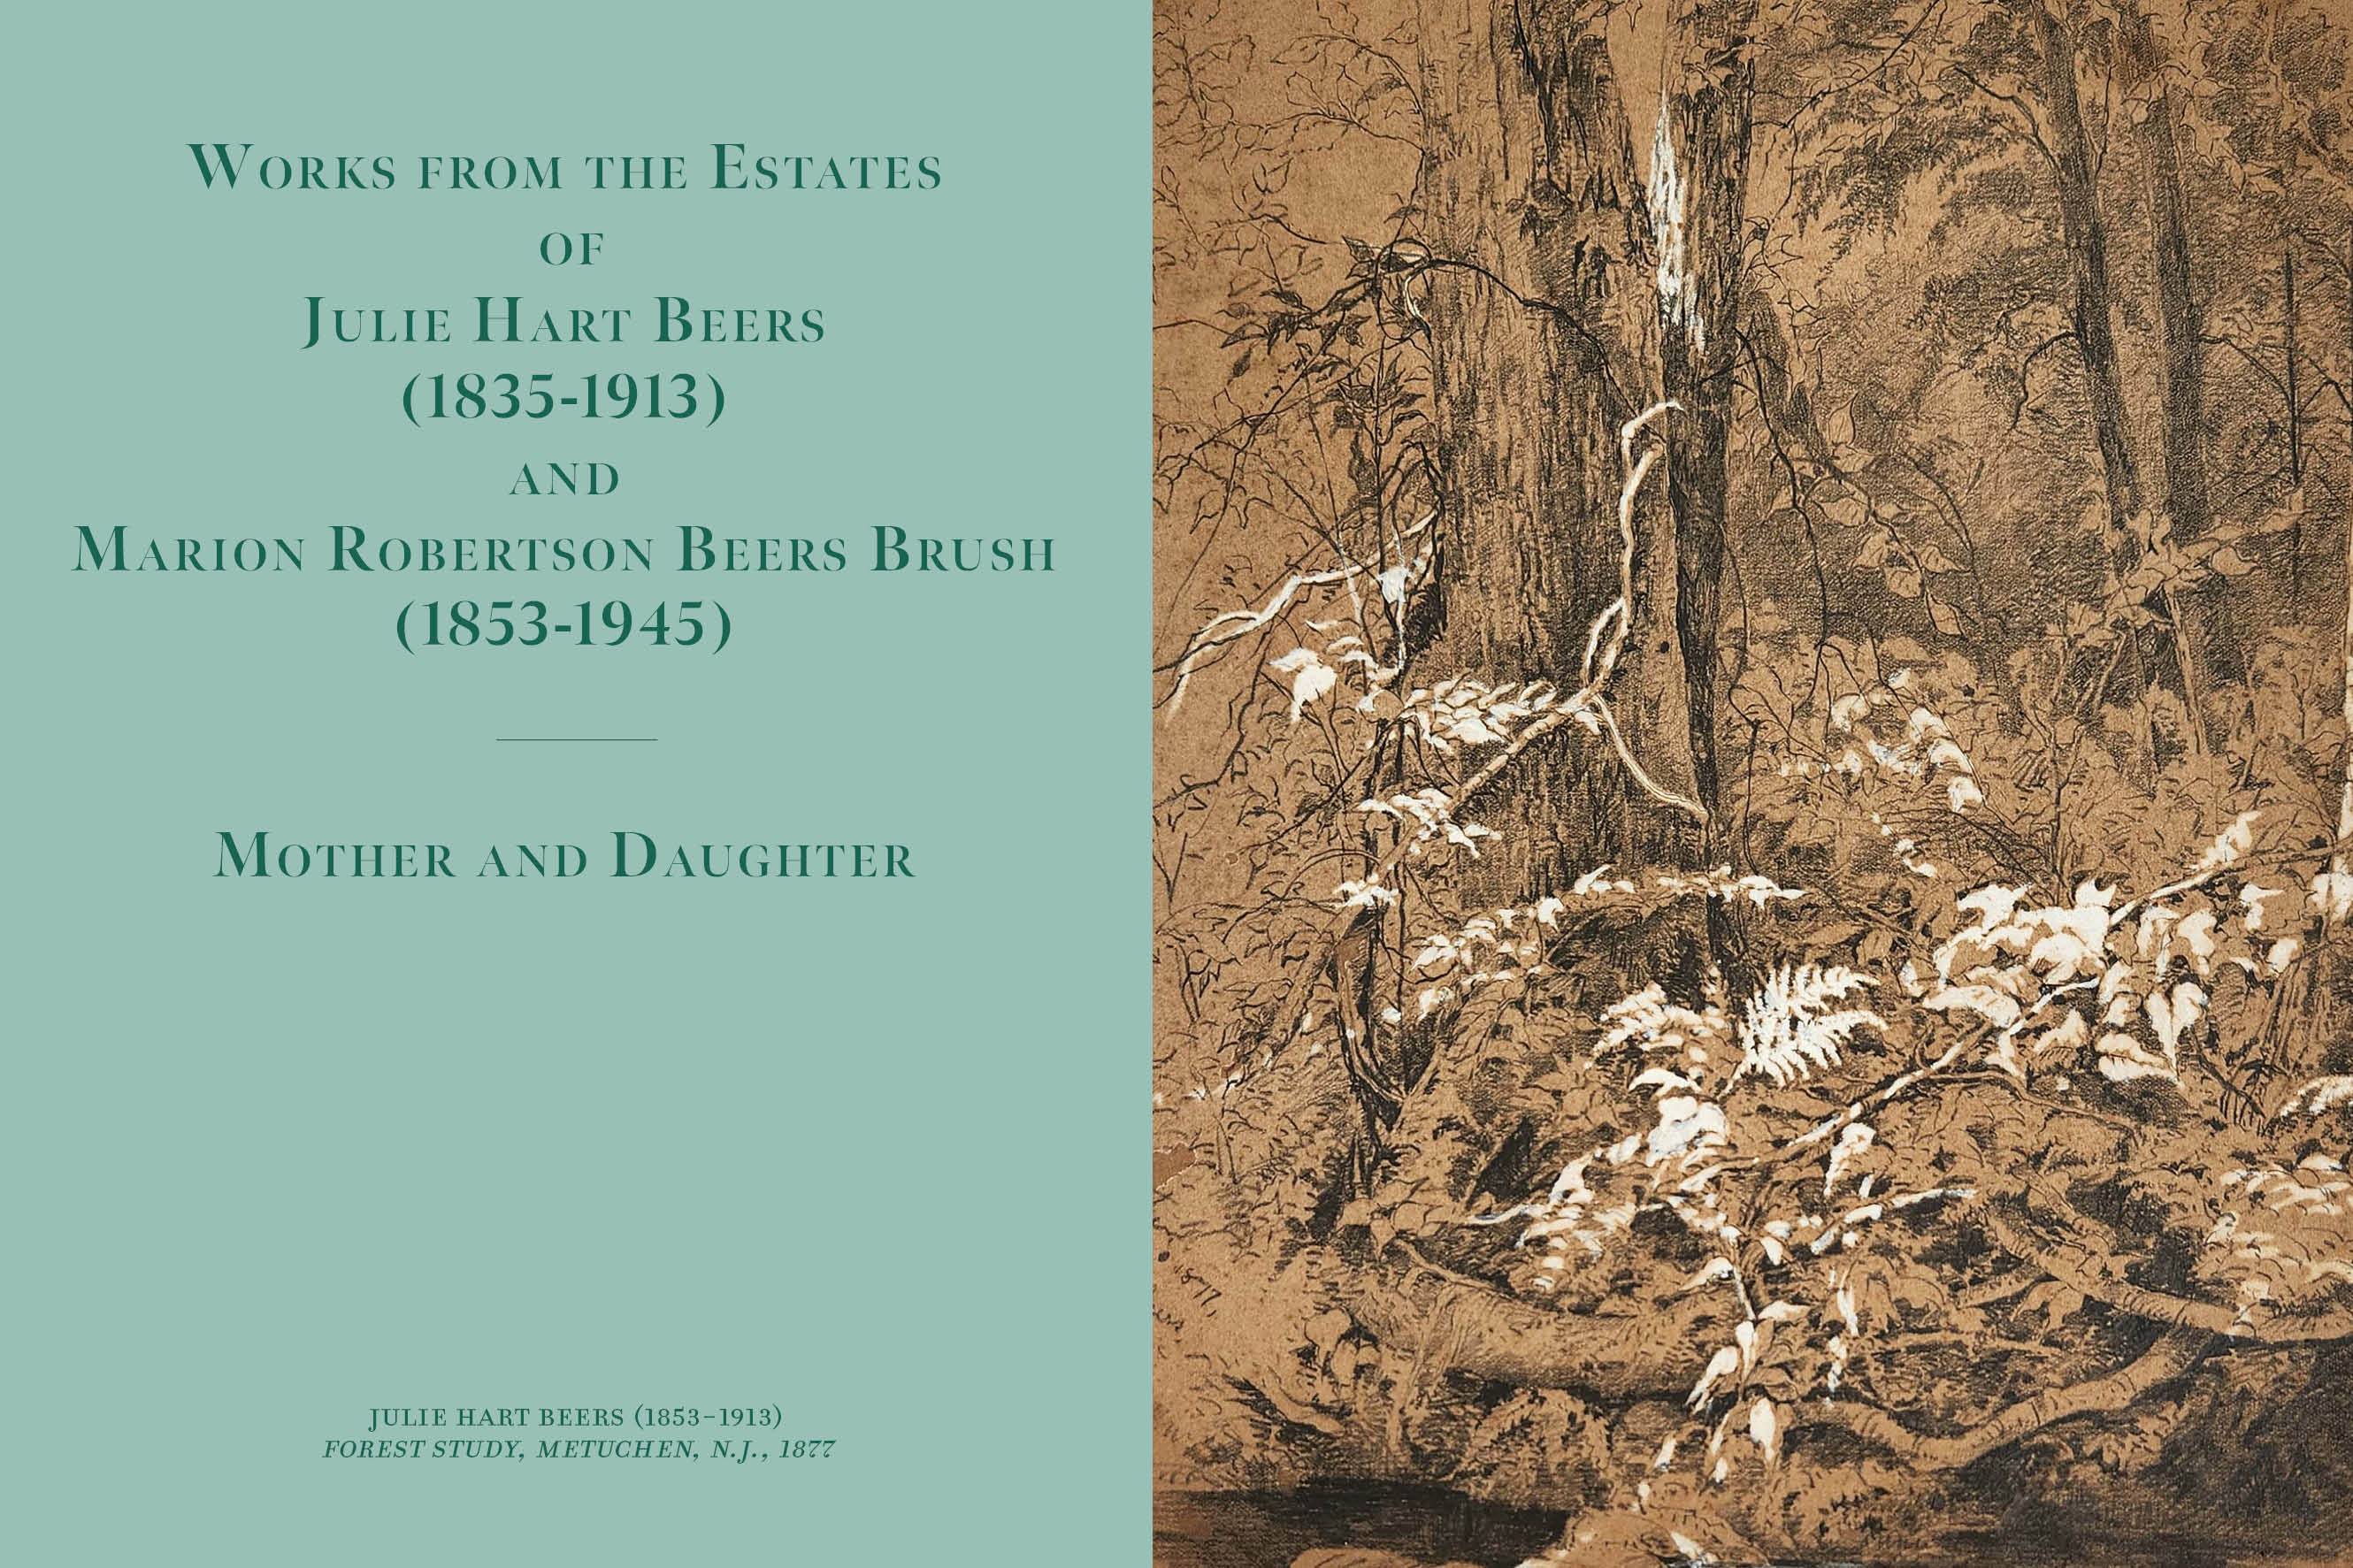 The Estates of Julie Hart Beers and Marion Robertson Beers Brush